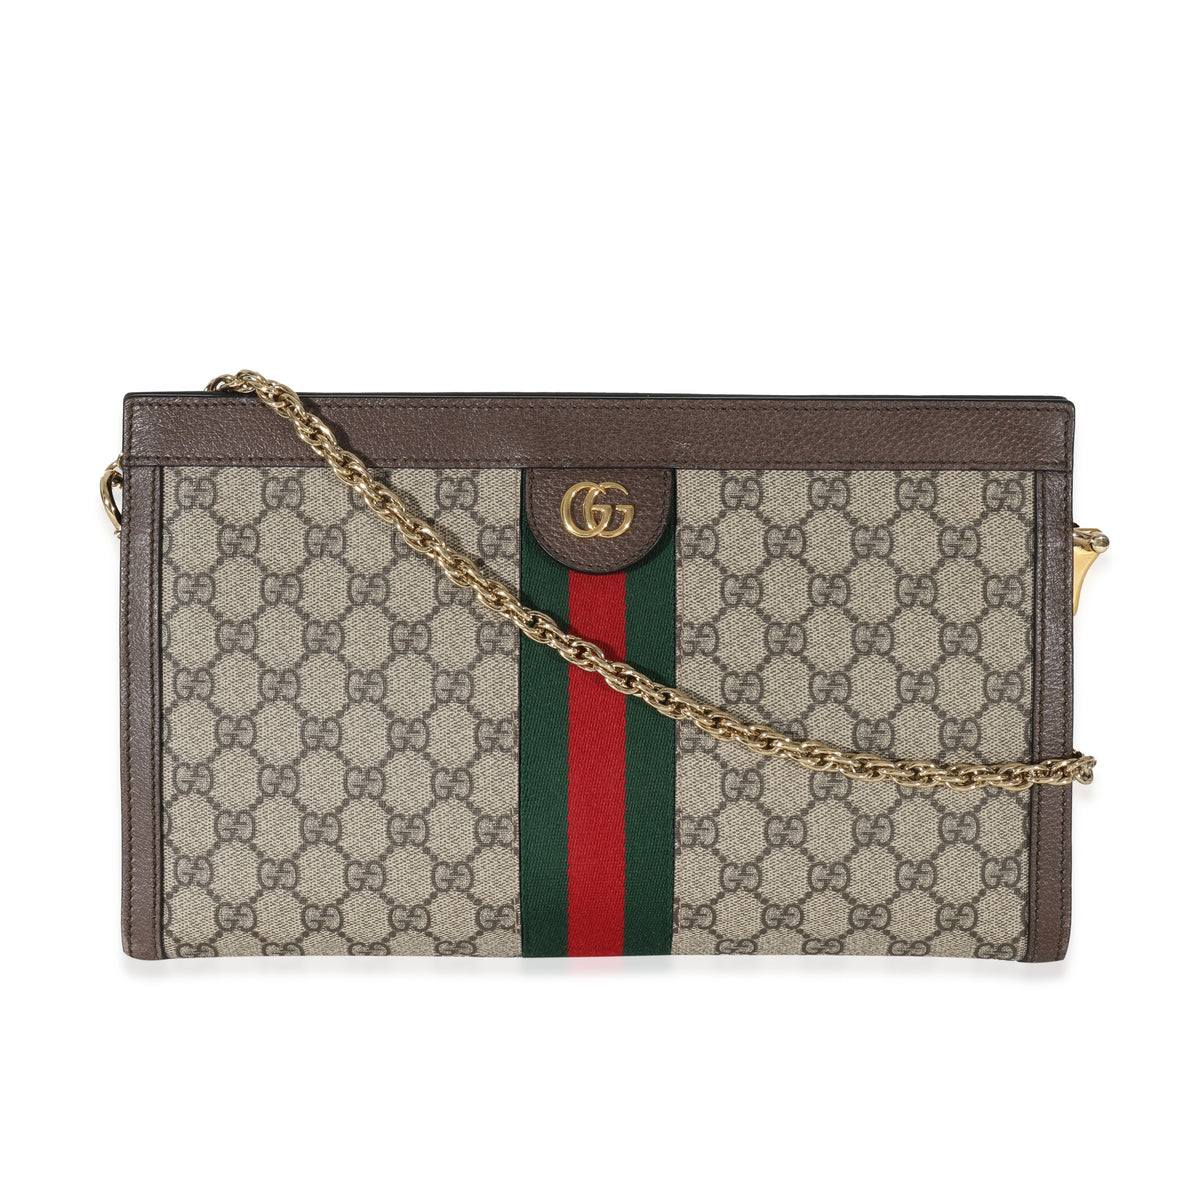 How Much Is A Gucci Bag?, myGemma